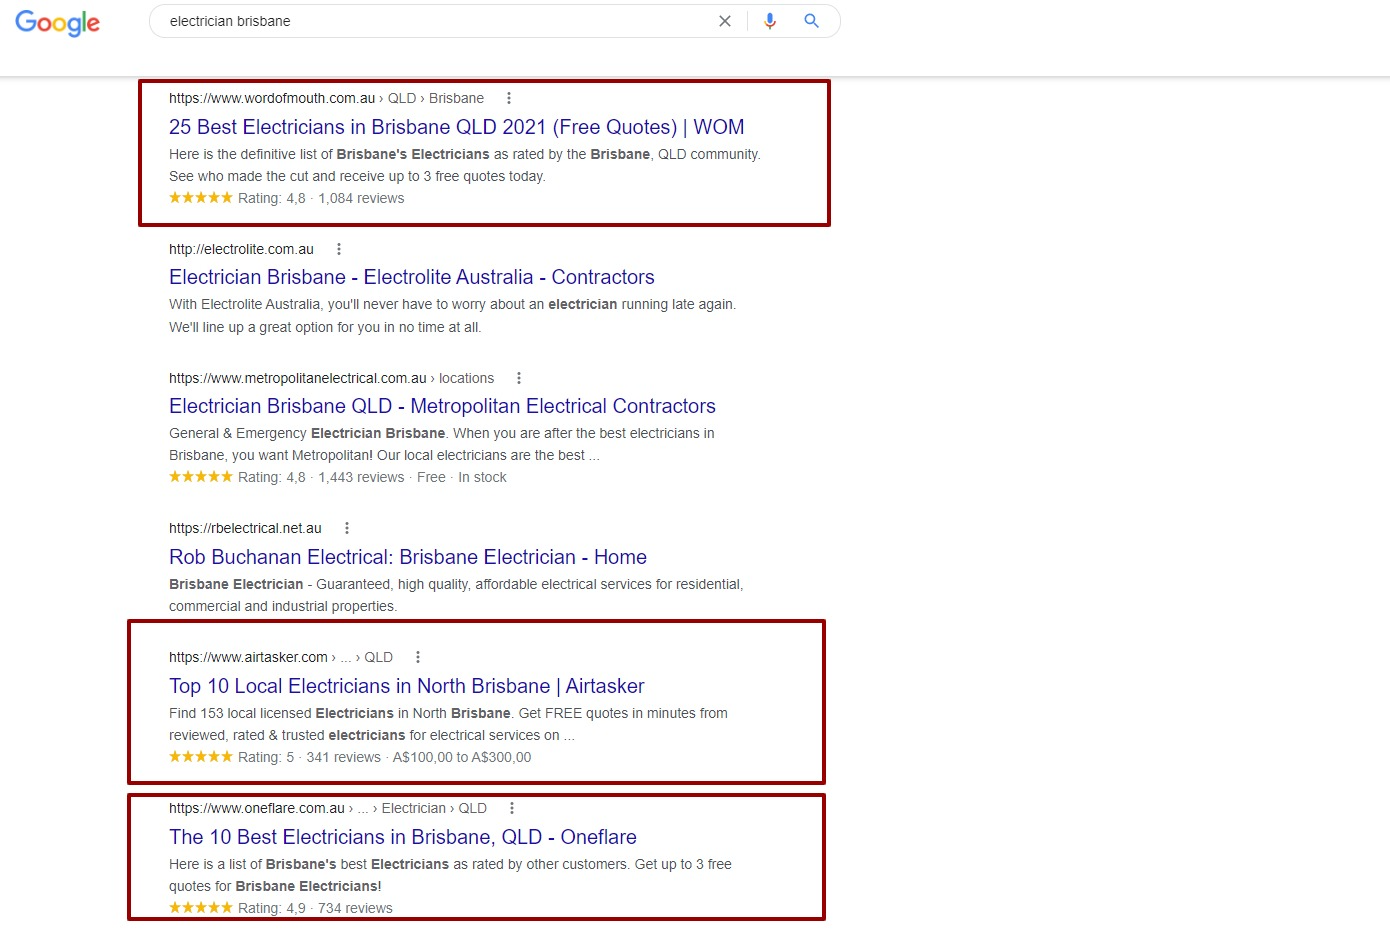 Google search results for electrician brisbane